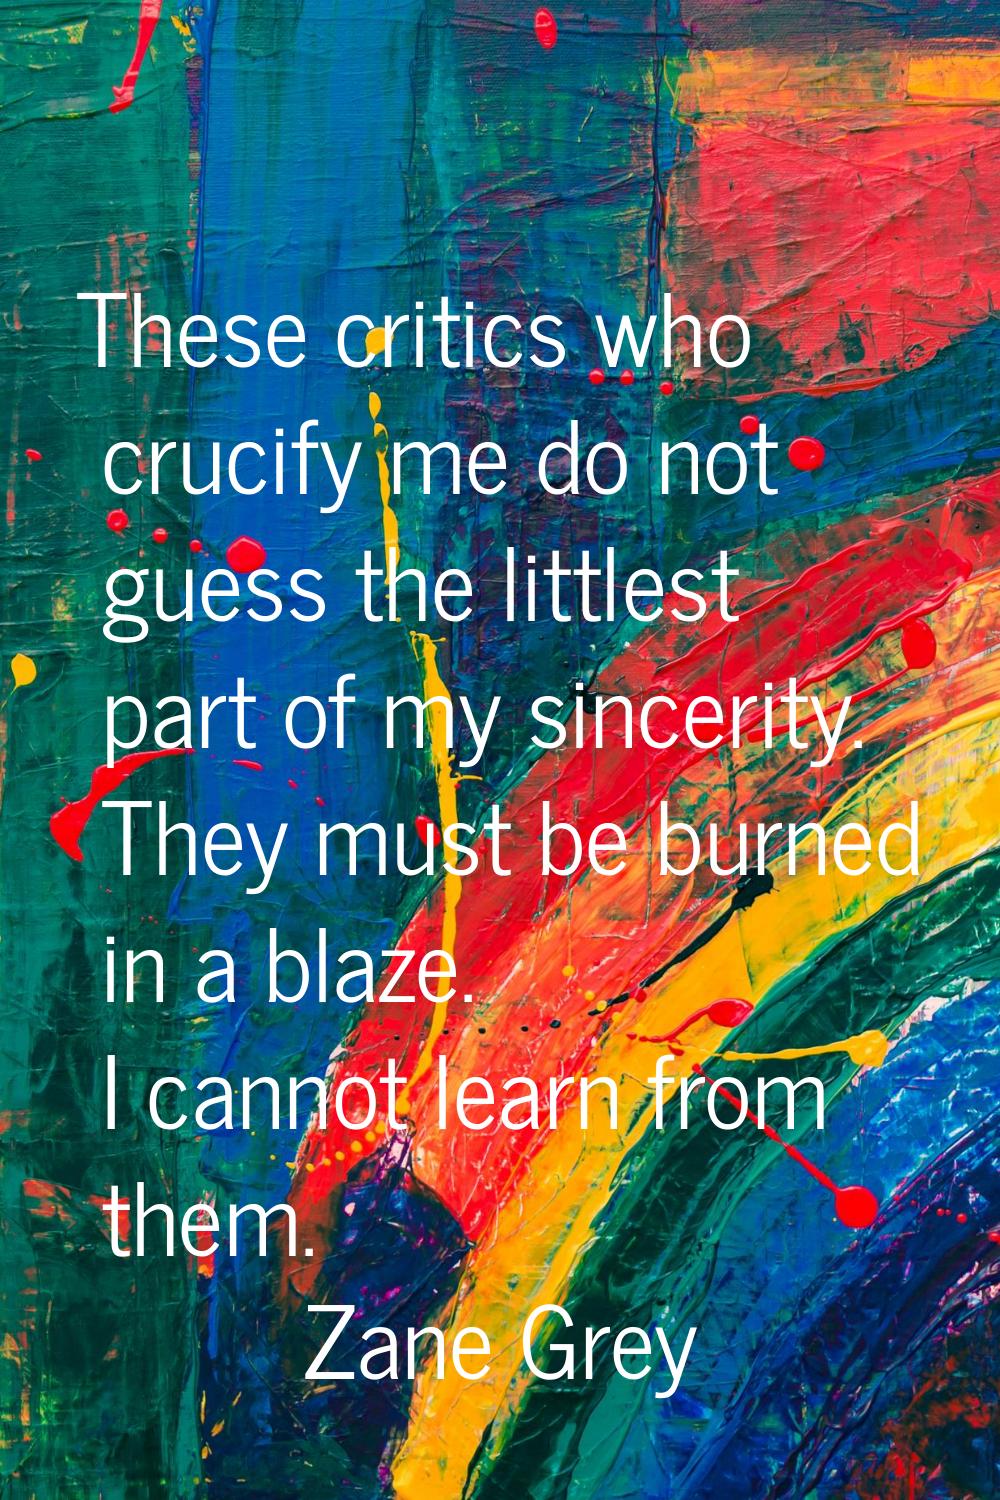 These critics who crucify me do not guess the littlest part of my sincerity. They must be burned in